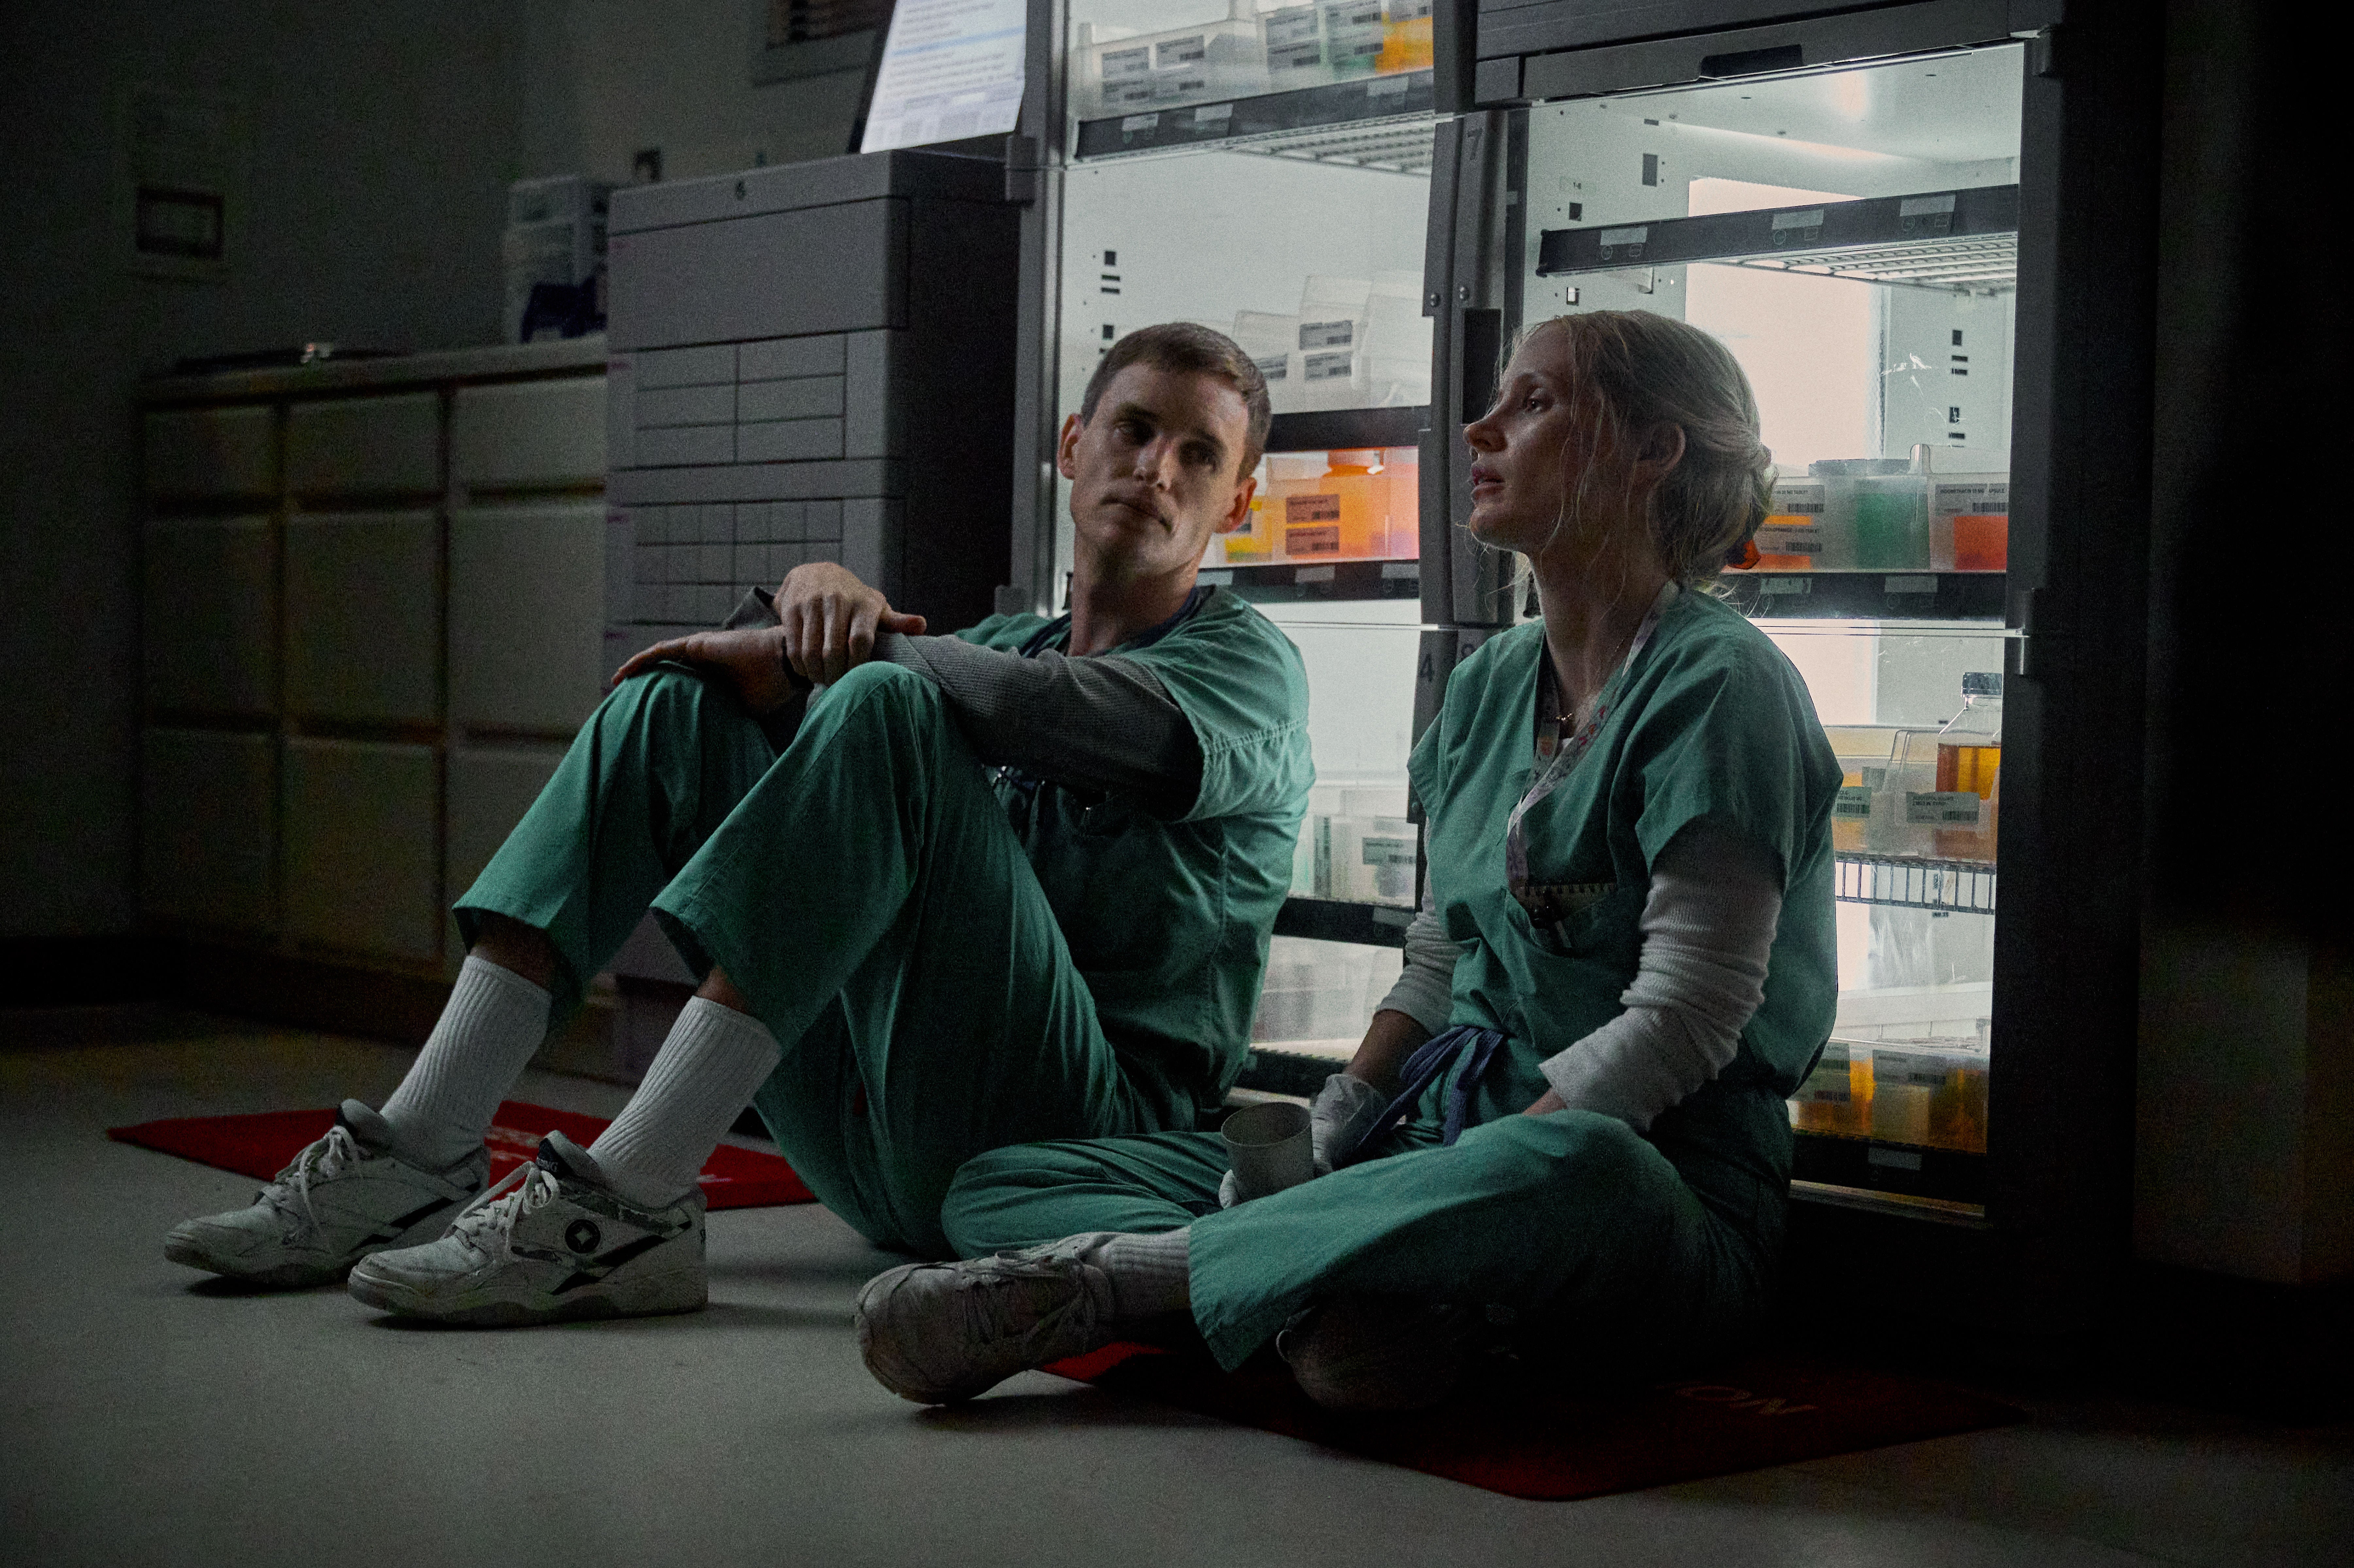 Eddie Redmayne as Charles Cullen and Jessica Chastain as Amy Loughren in the Netflix dramatization ‘The Good Nurse'